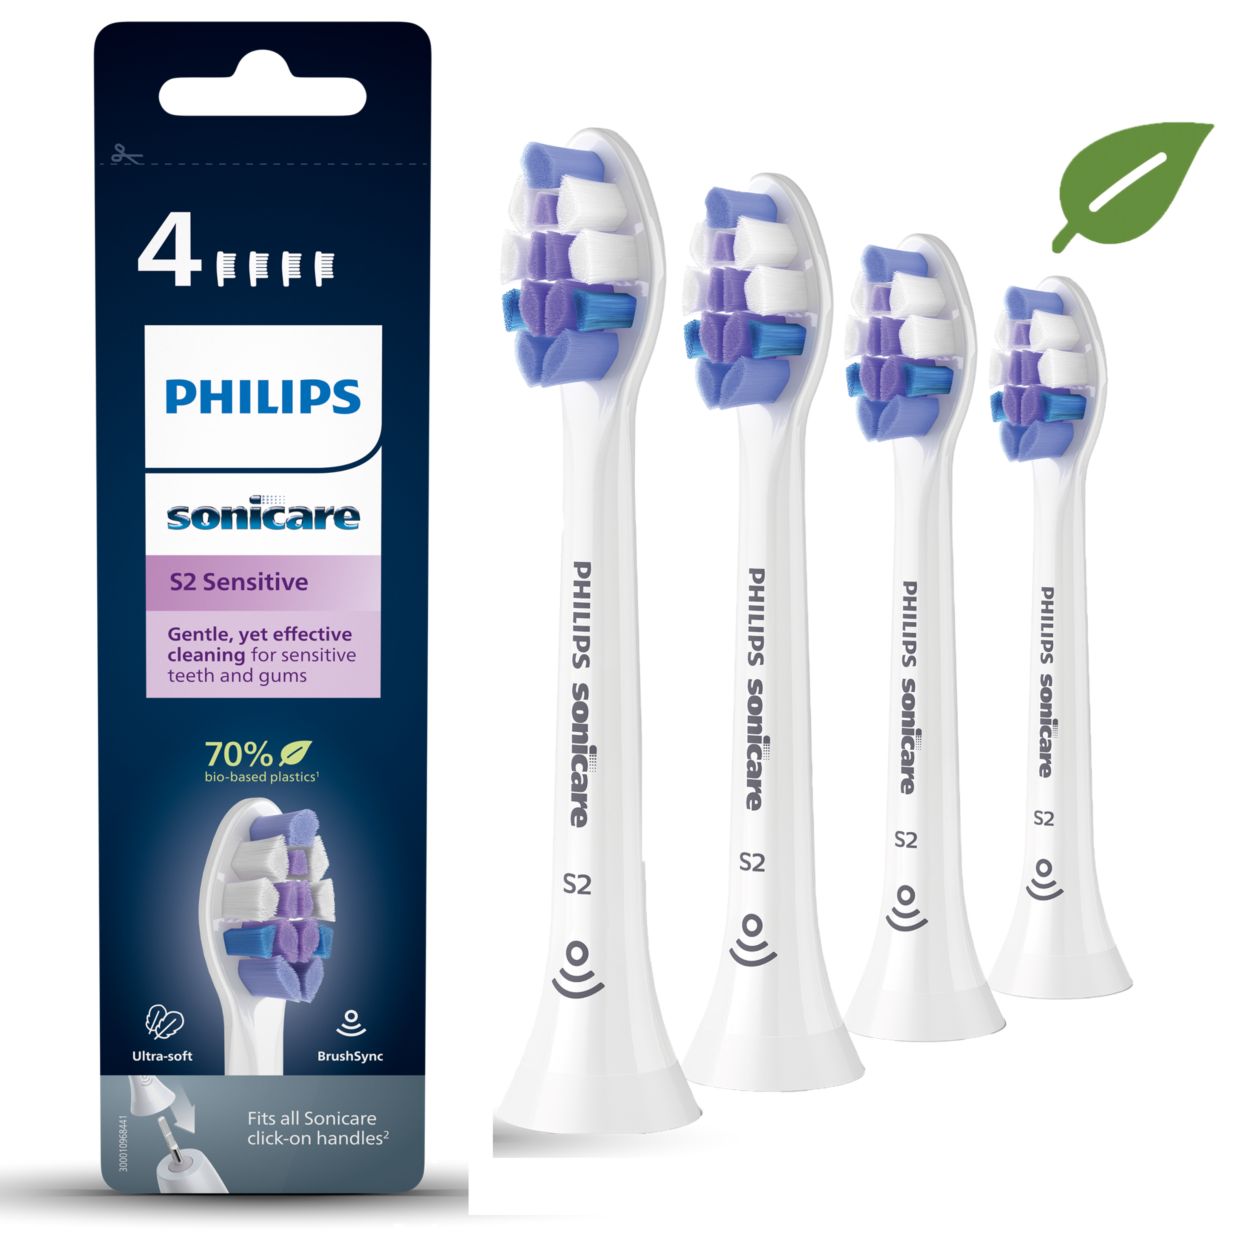 Ultra-soft brush head for sensitive teeth and gums